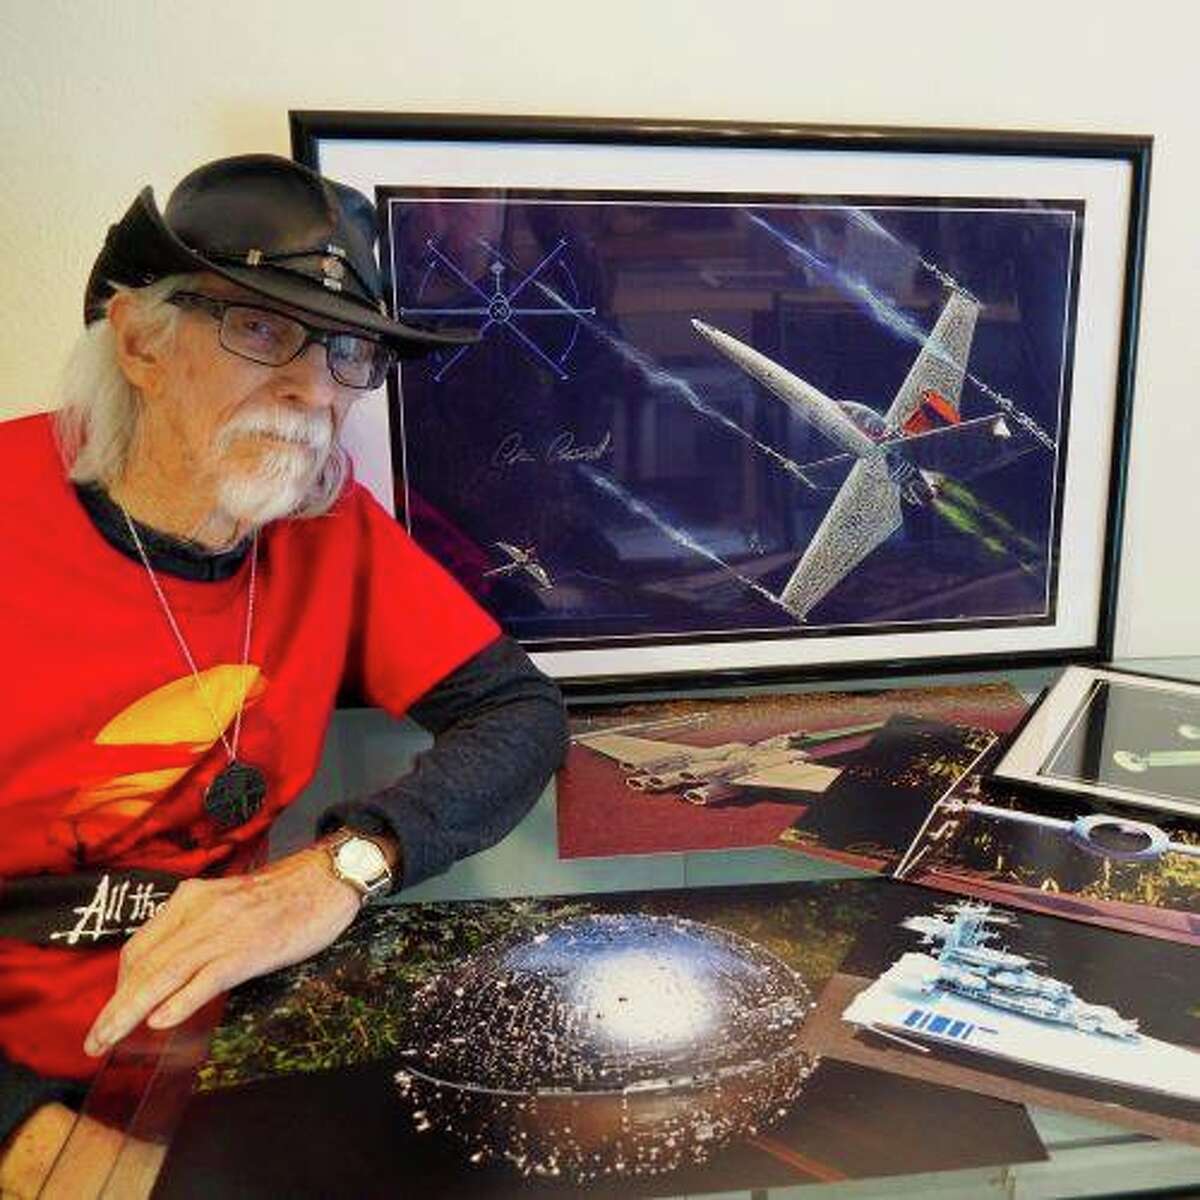 Colin Cantwell poses next to concept art he drew of the "X-Wing" spaceship in the 1977 film "Star Wars."